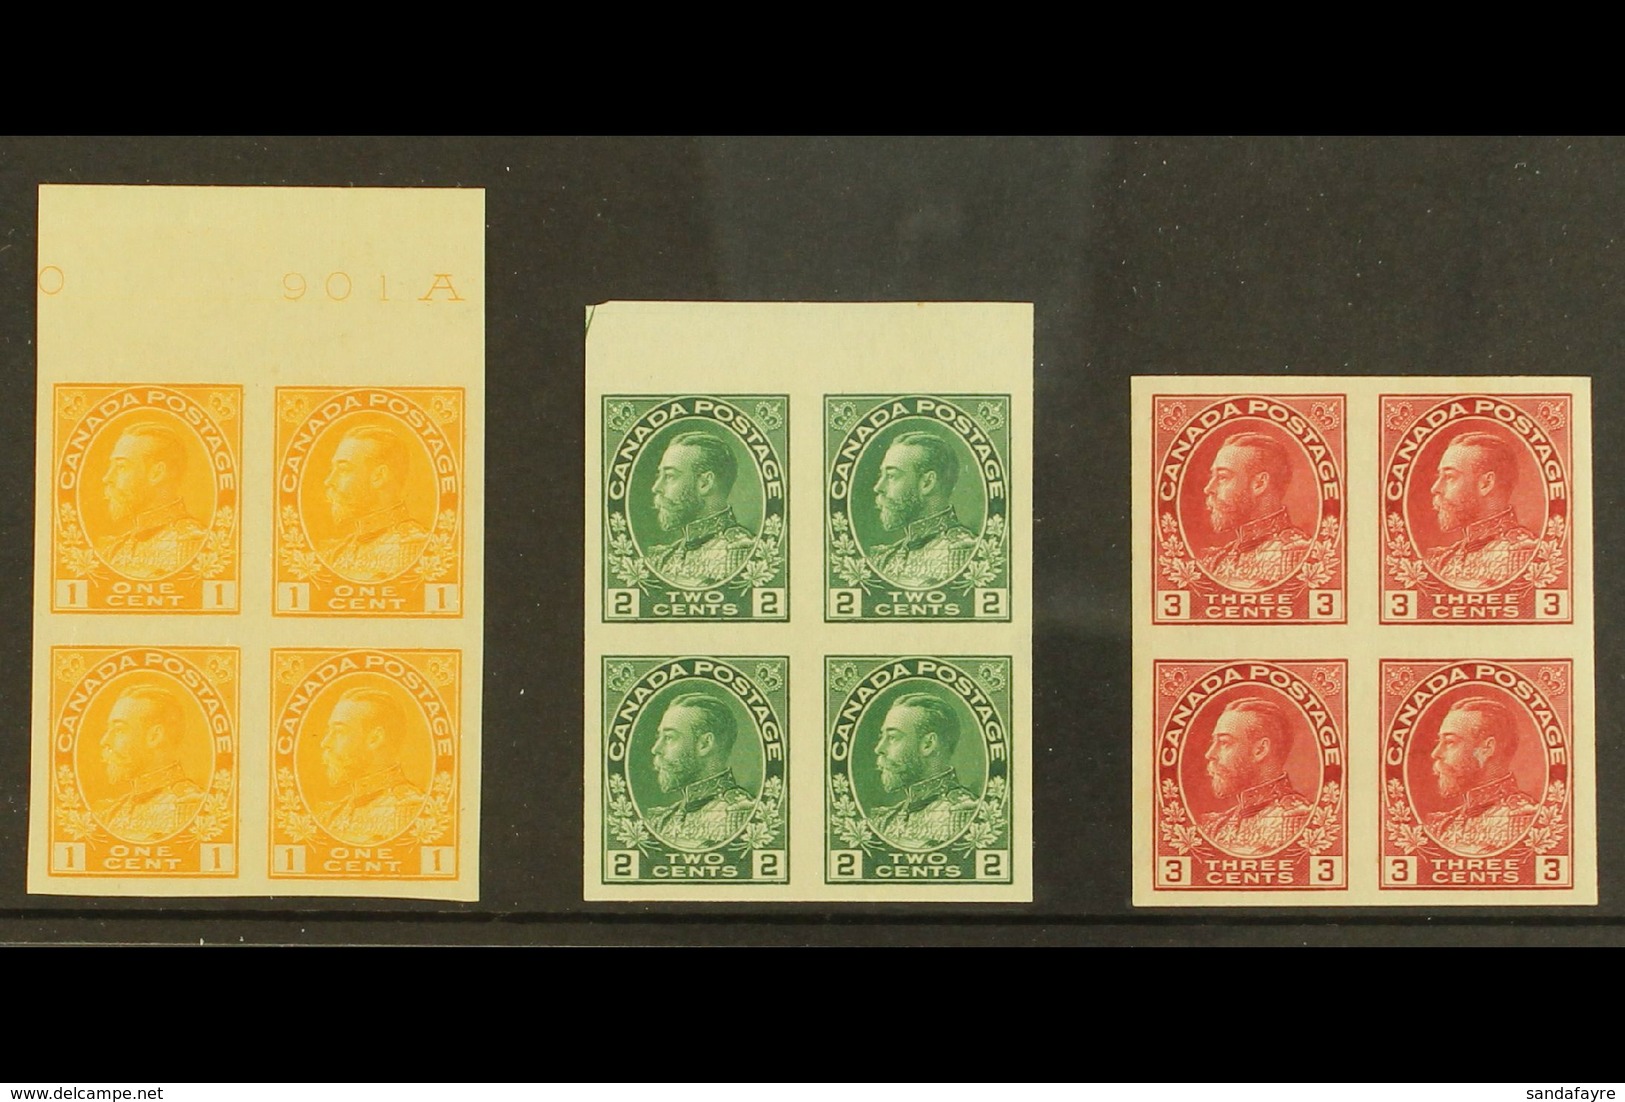 1922-31 1c Chrome, 2c Deep Green And 3c Carmine In Imperf Pairs, SG 259/61, As Very Fine  Mint Blocks Of 4, 2 NHM, 2 Tra - Mauricio (...-1967)